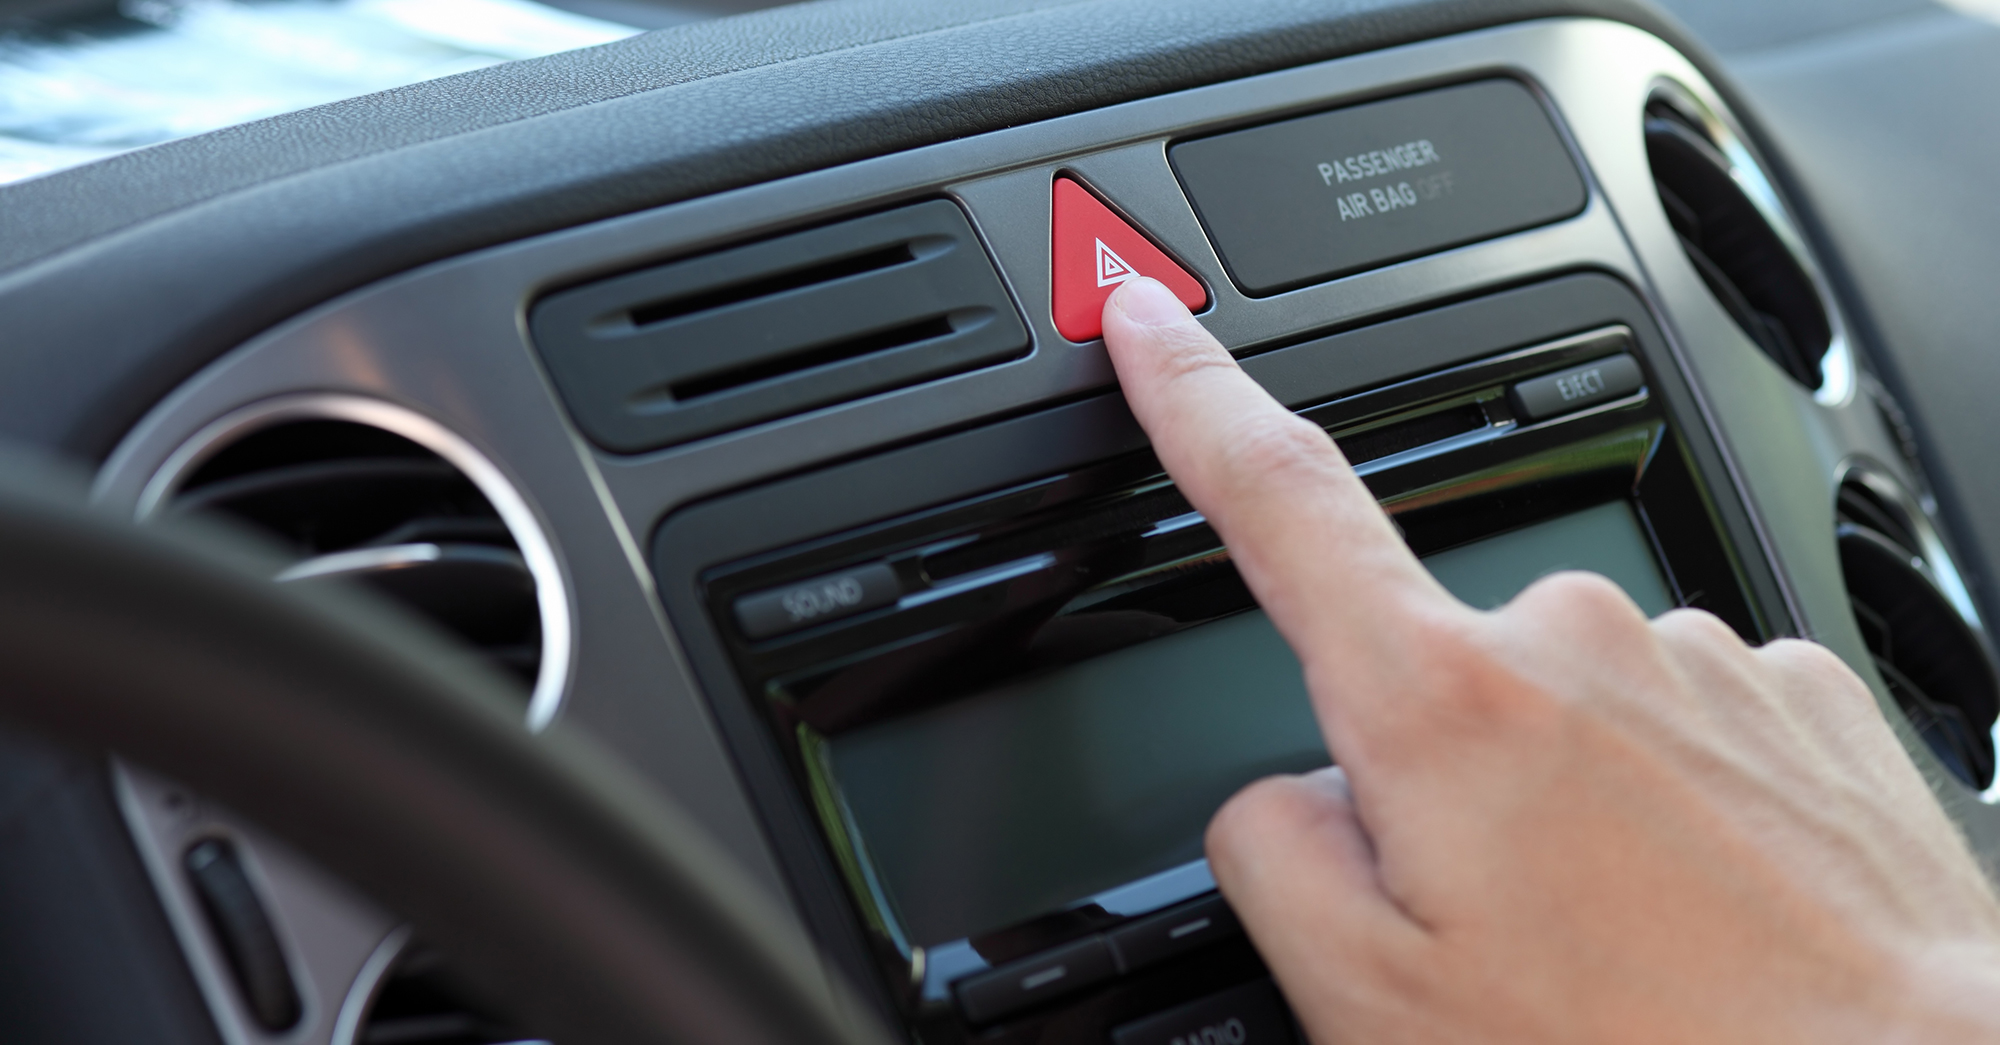 A finger presses the hazard light button, symbolized by a red triangle